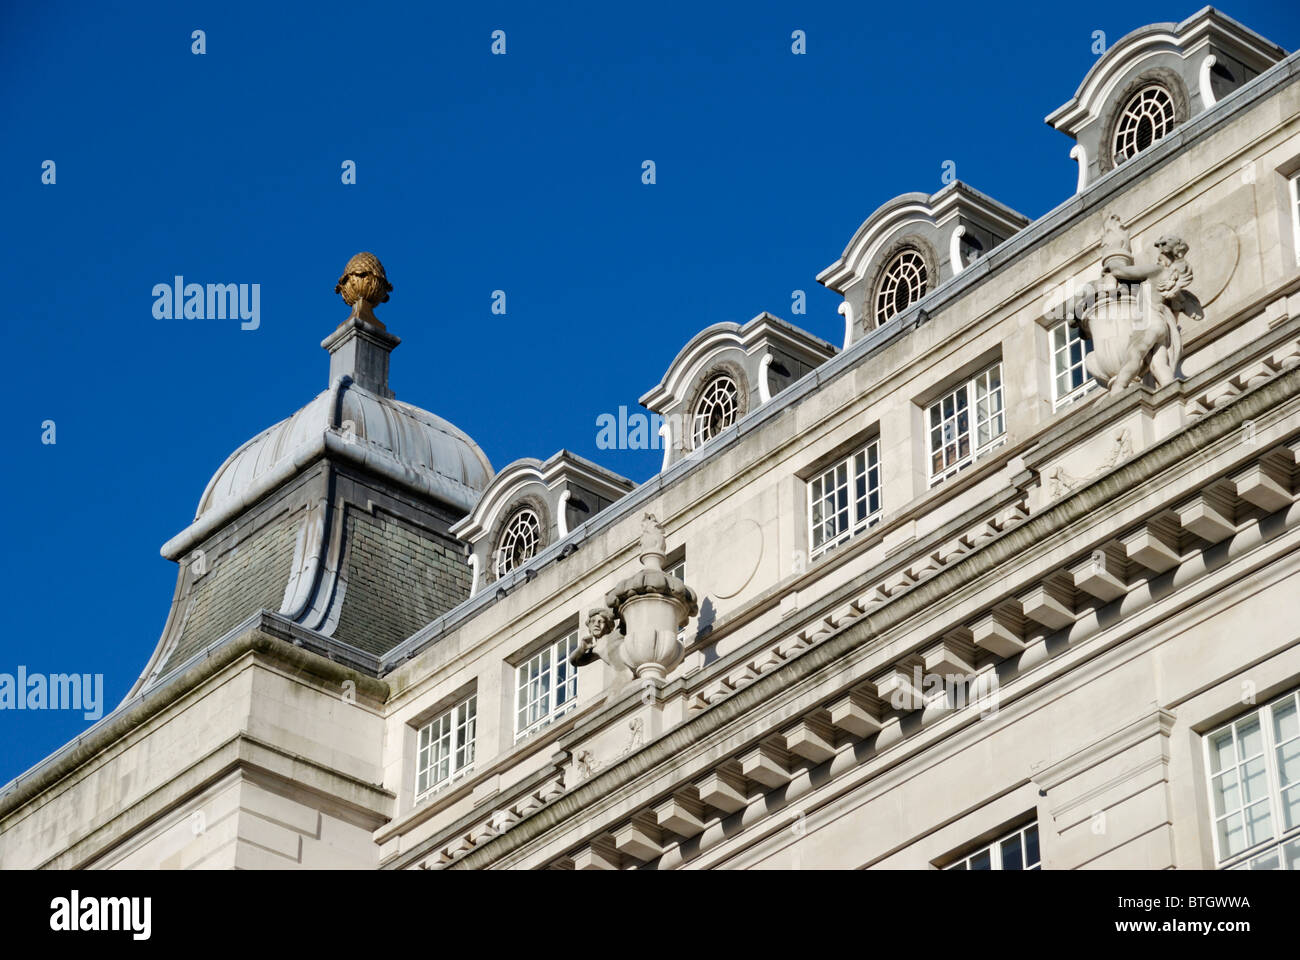 Close-up of ornate stone building in Piccadilly, London, England Stock Photo